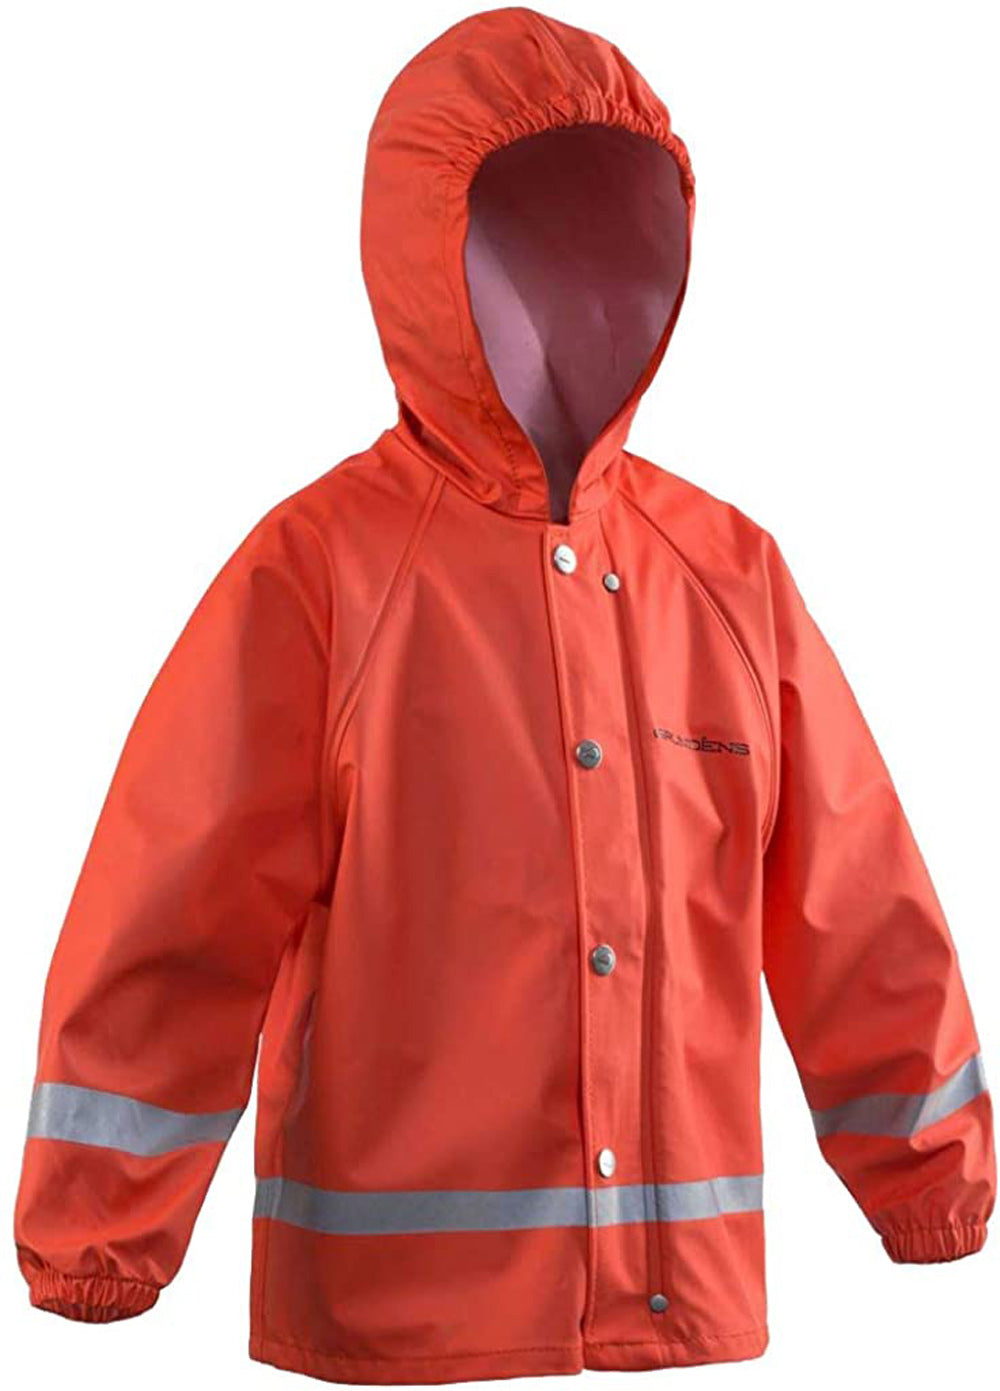 Zenith 293 Jacket in Orange color from the front view